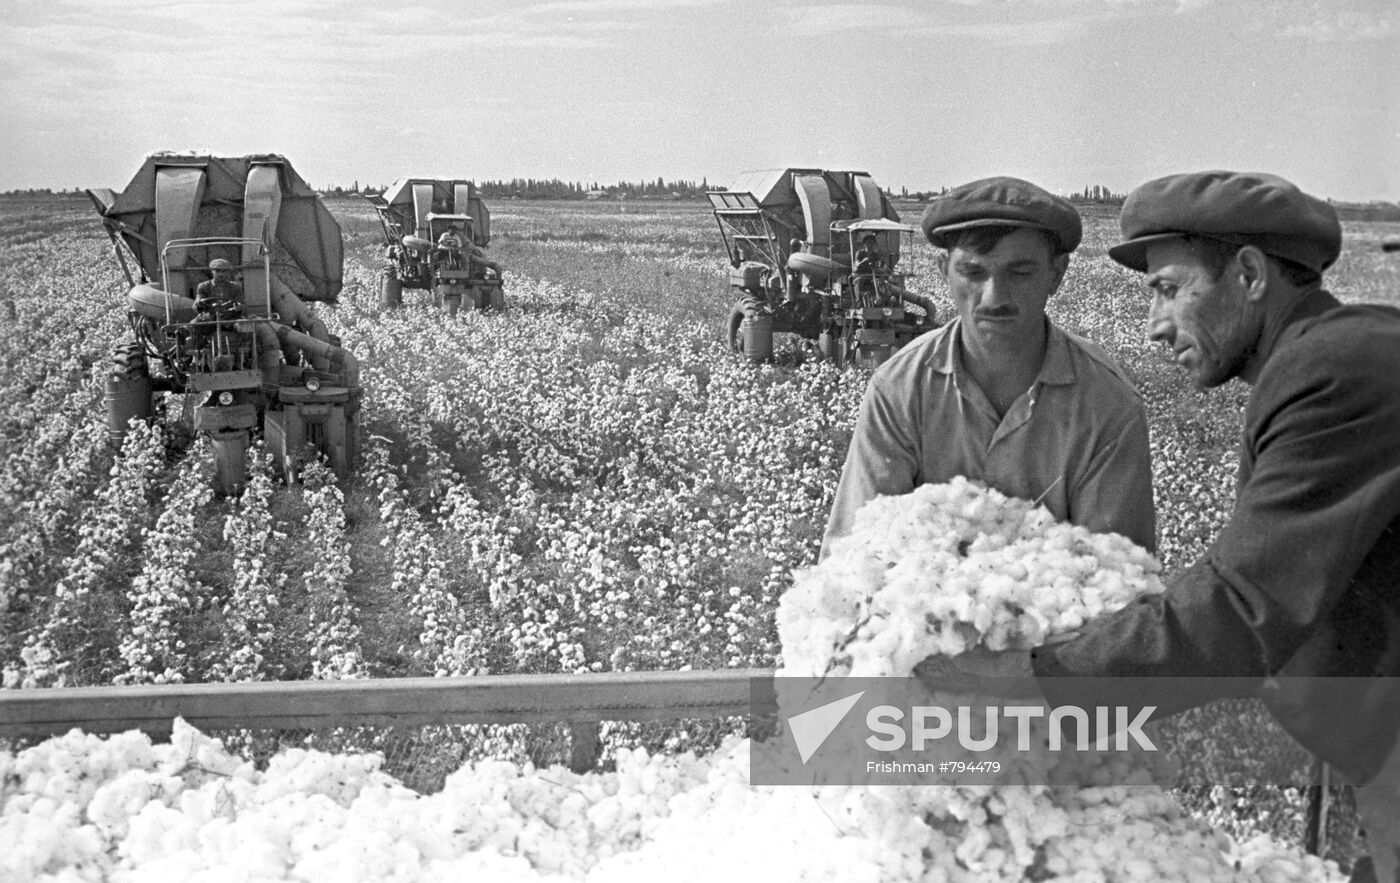 Cotton harvesting at collective farm named after F. Engels